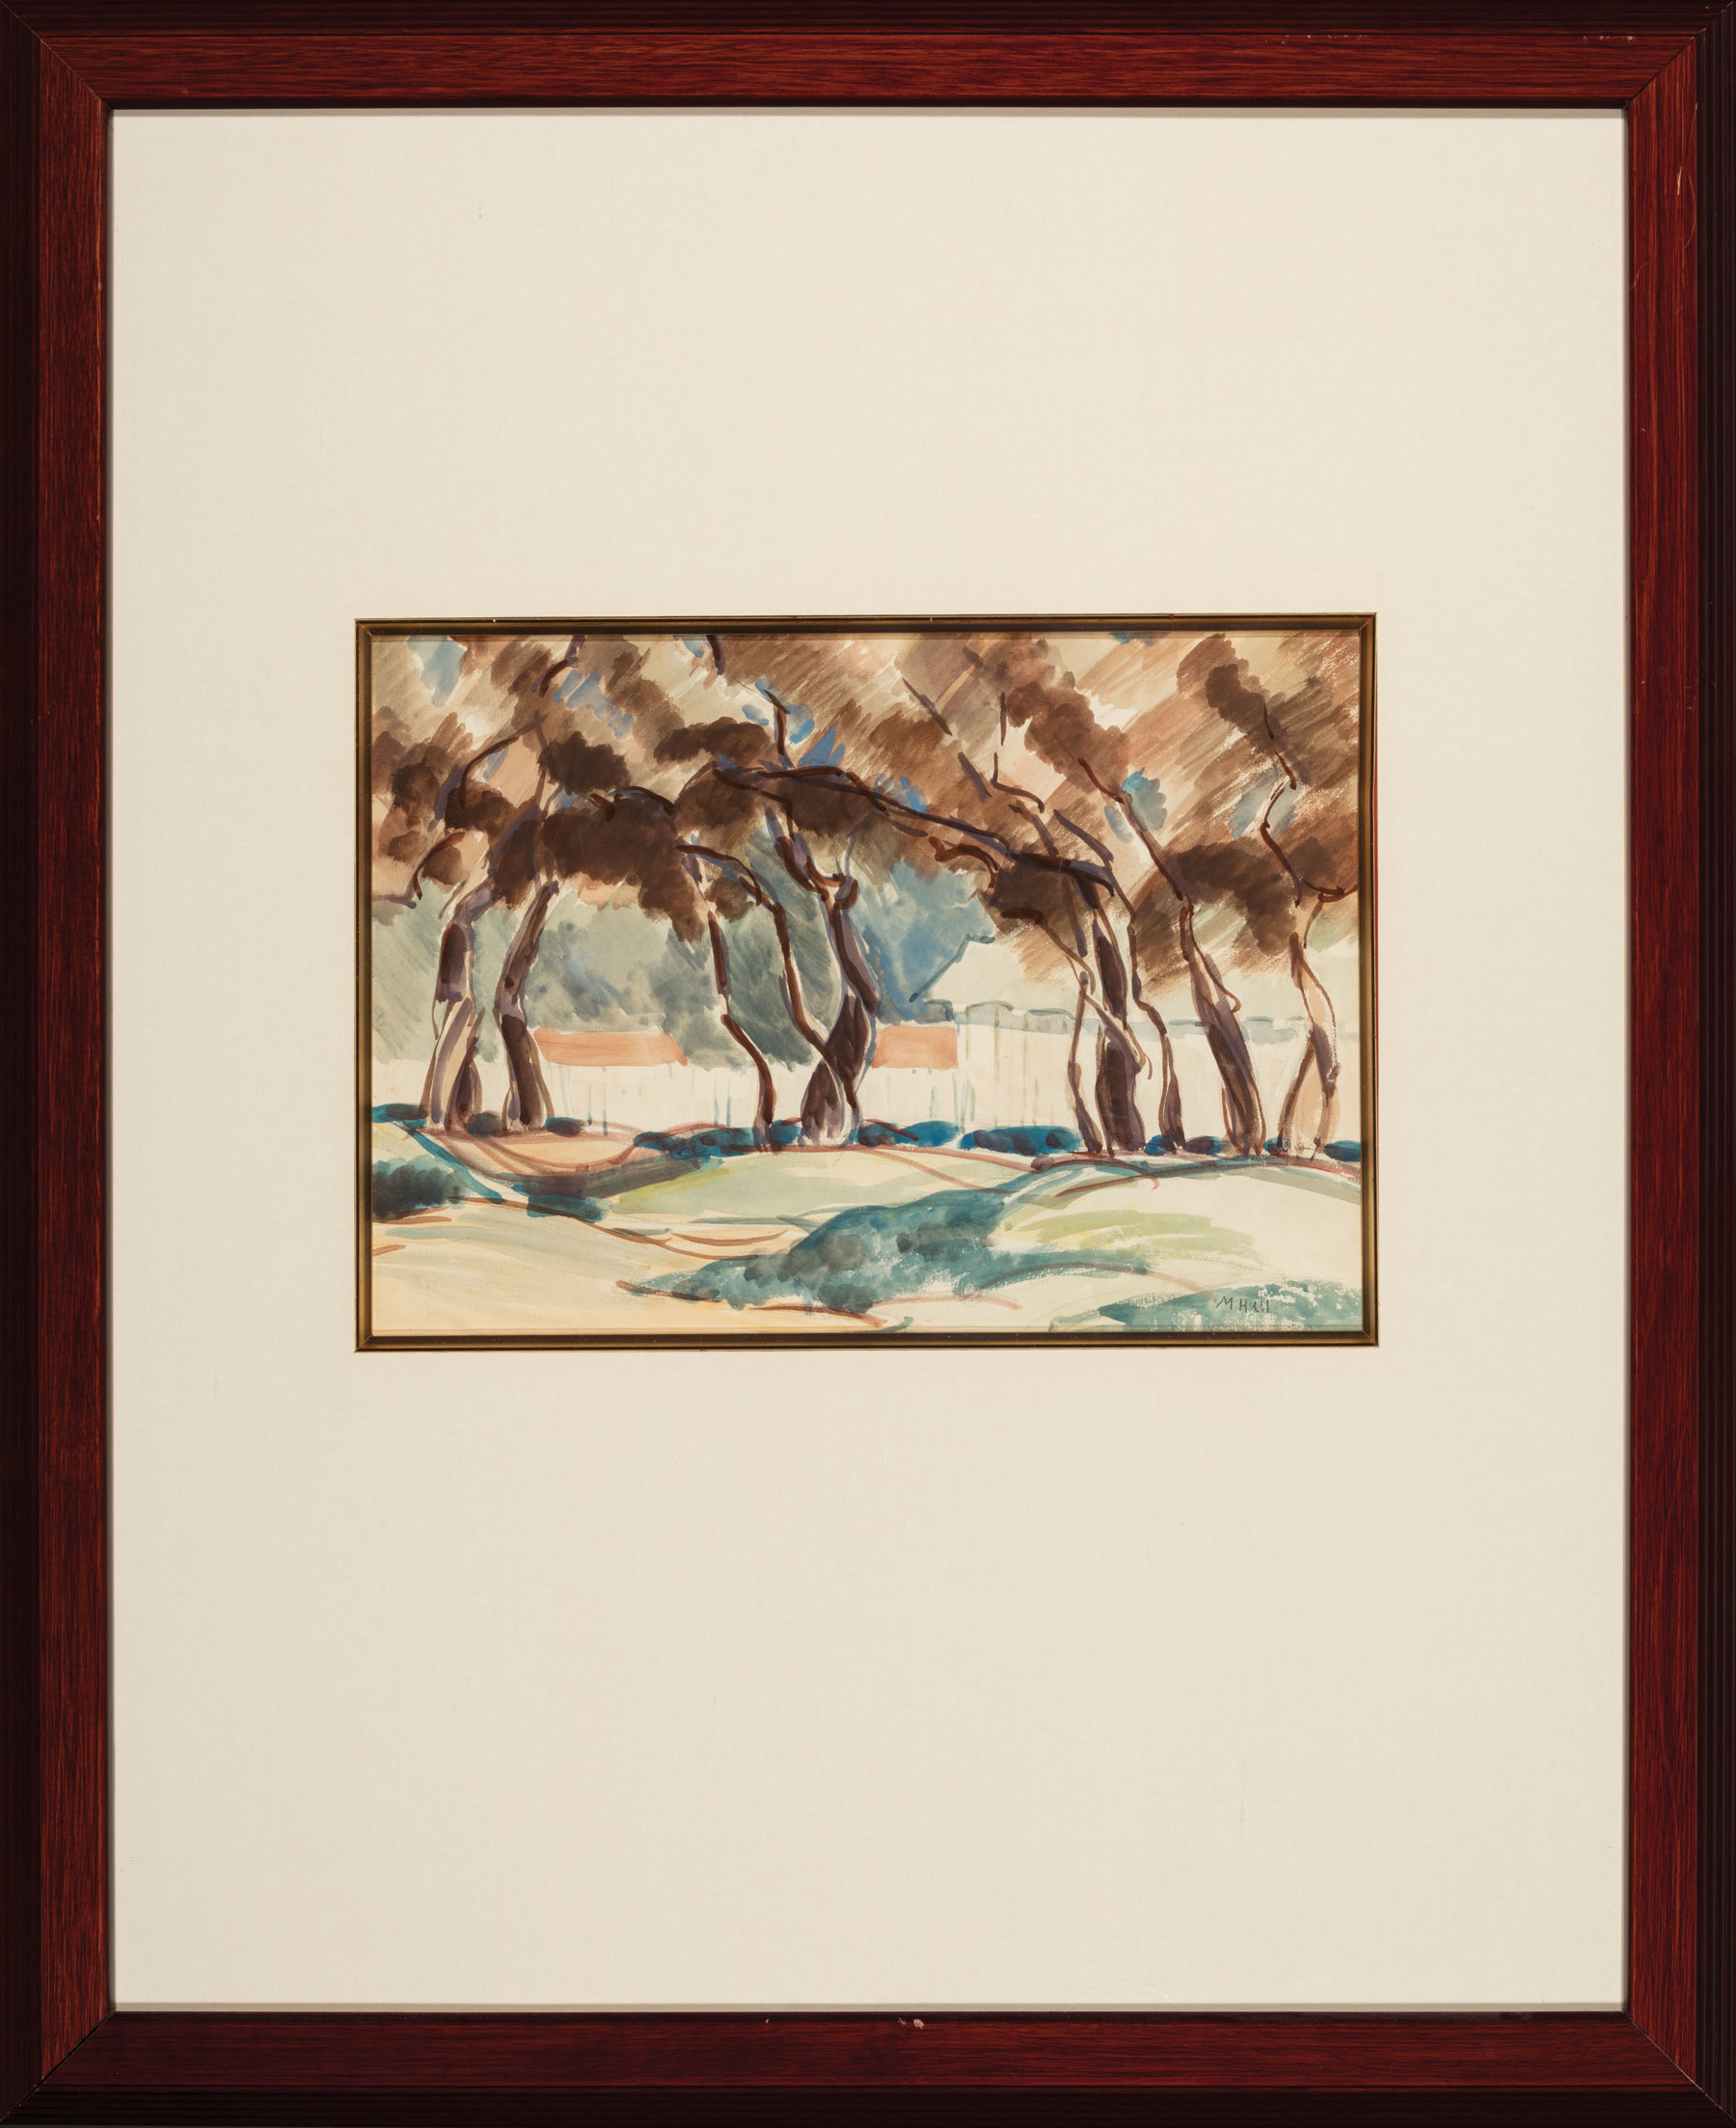 Marie Atkinson Hull (American/Mississippi, 1890-1980), "Trees", watercolor on paper, pencil-signed